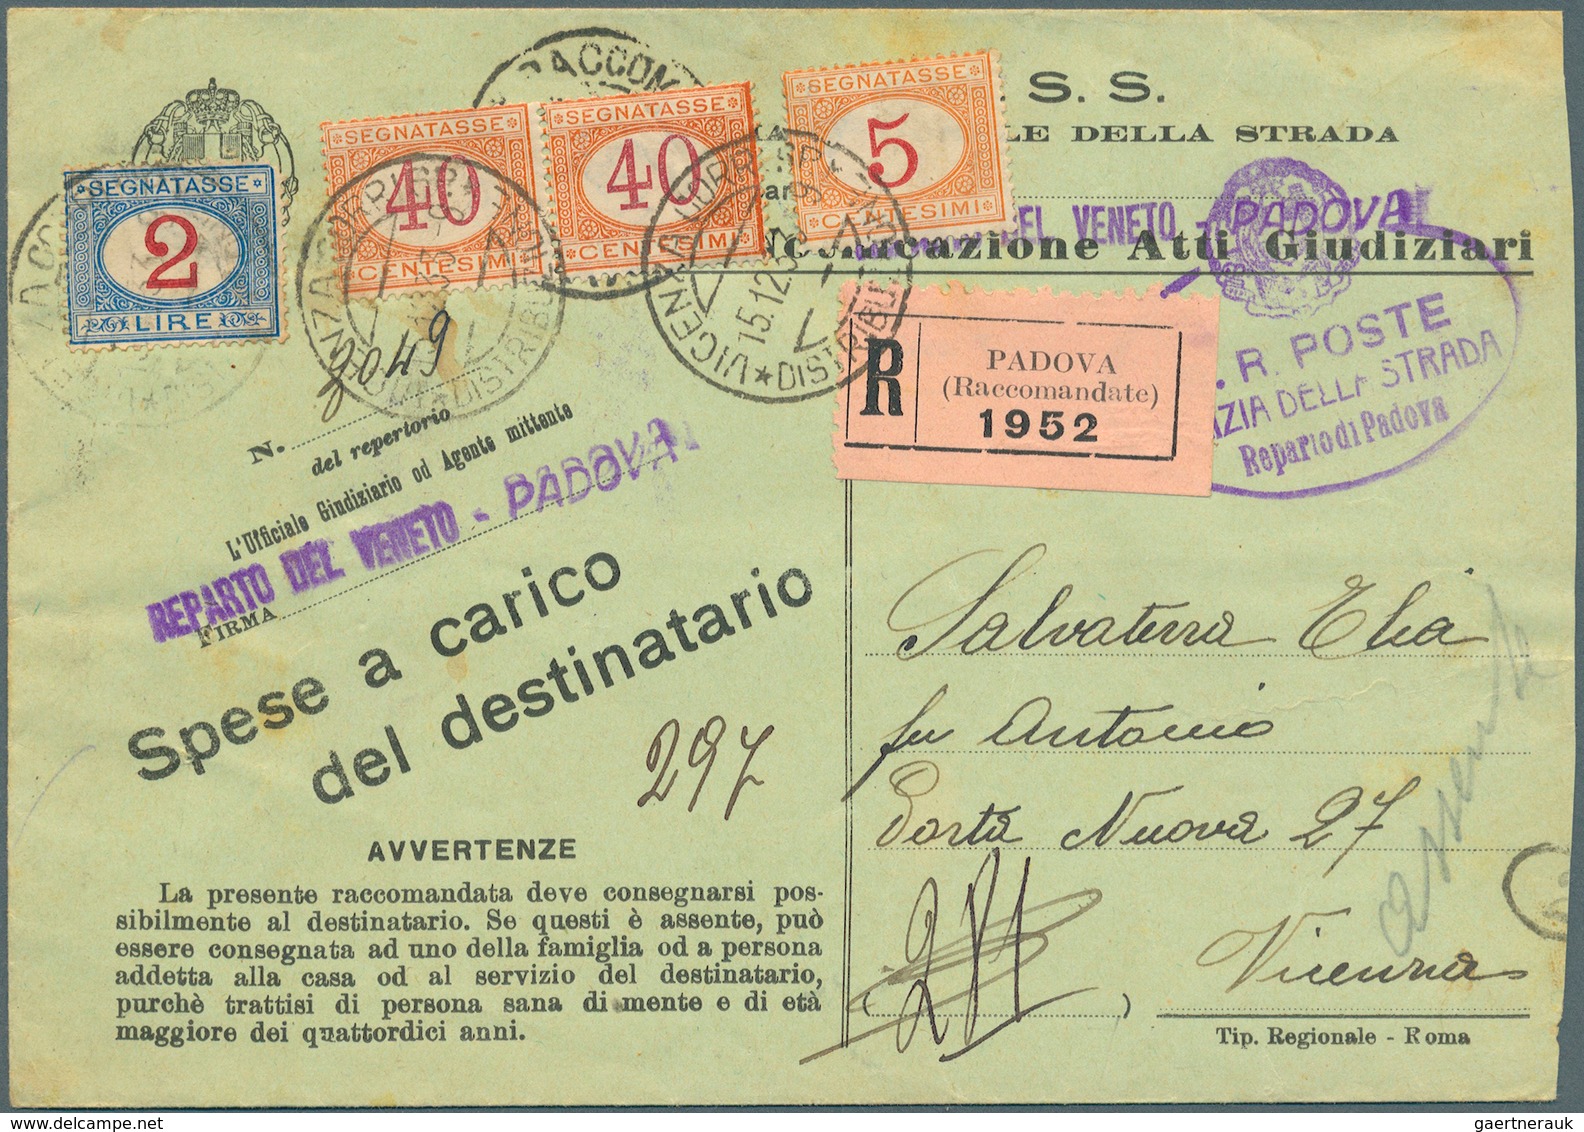 27026 Italien - Portomarken: 1883/1970 (ca) 80+ covers with porto stamps - a huge part of them "used as re